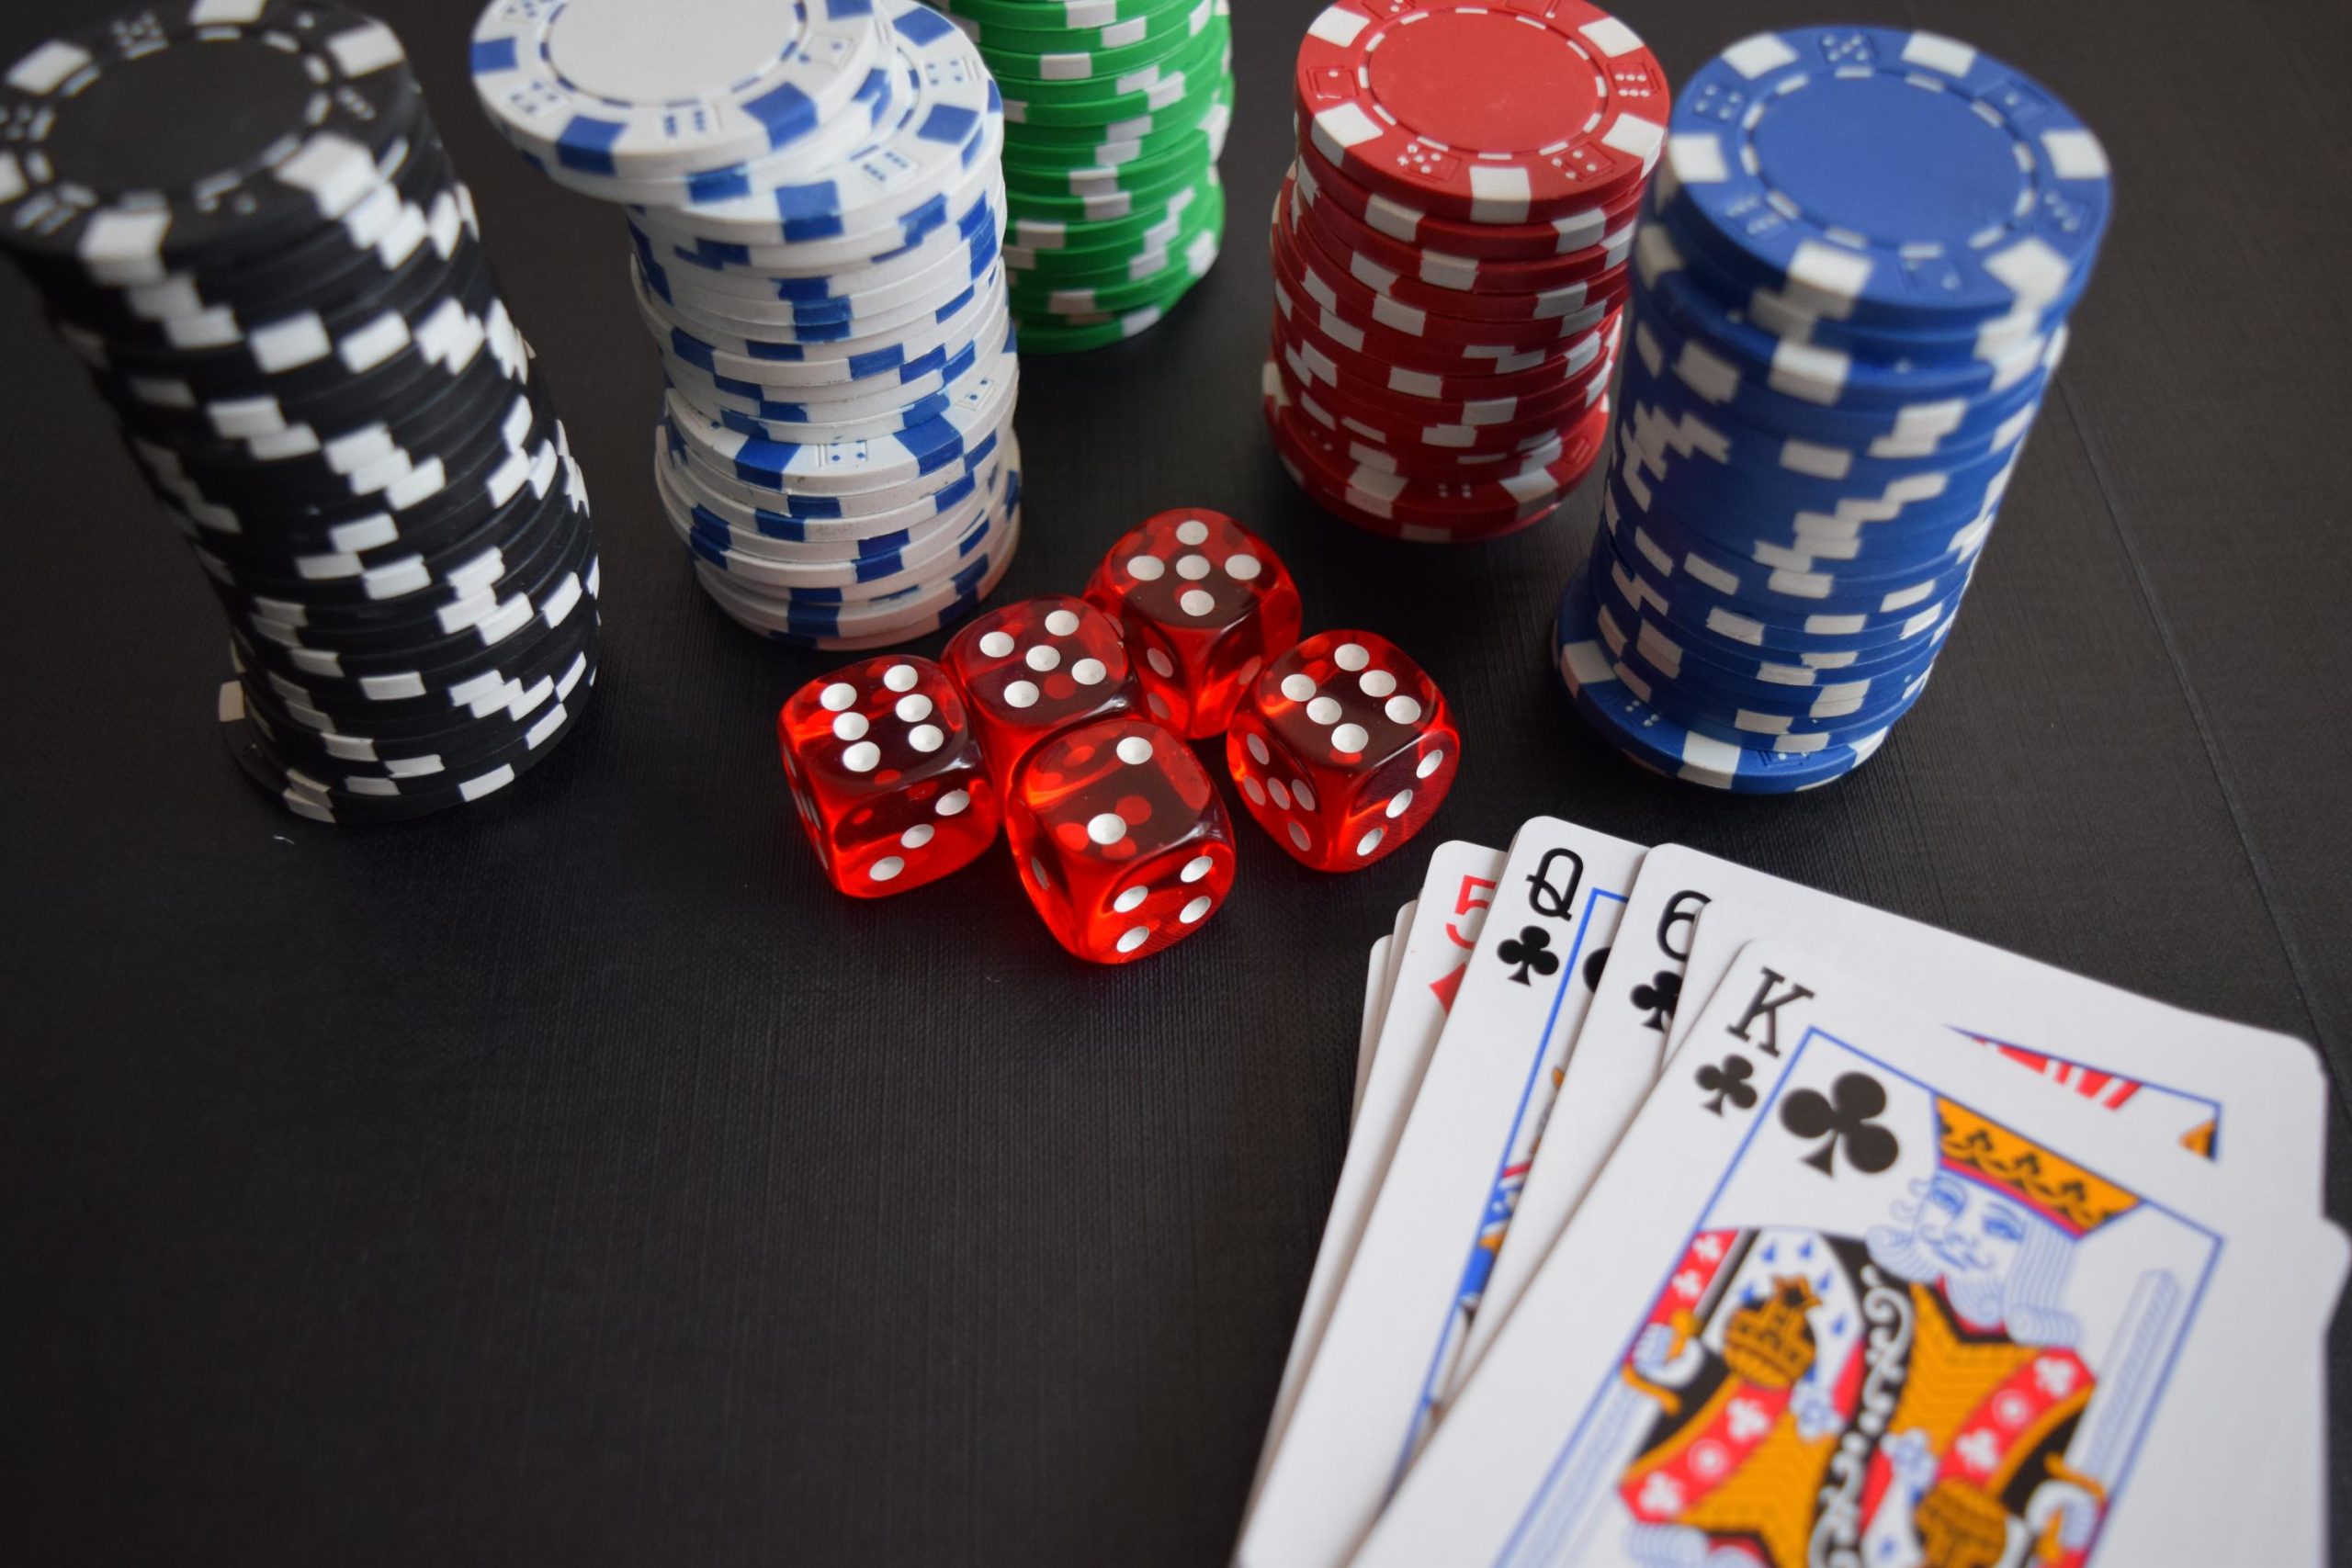 From High Rollers to Casual Players: The Diversity of Casino Demographics